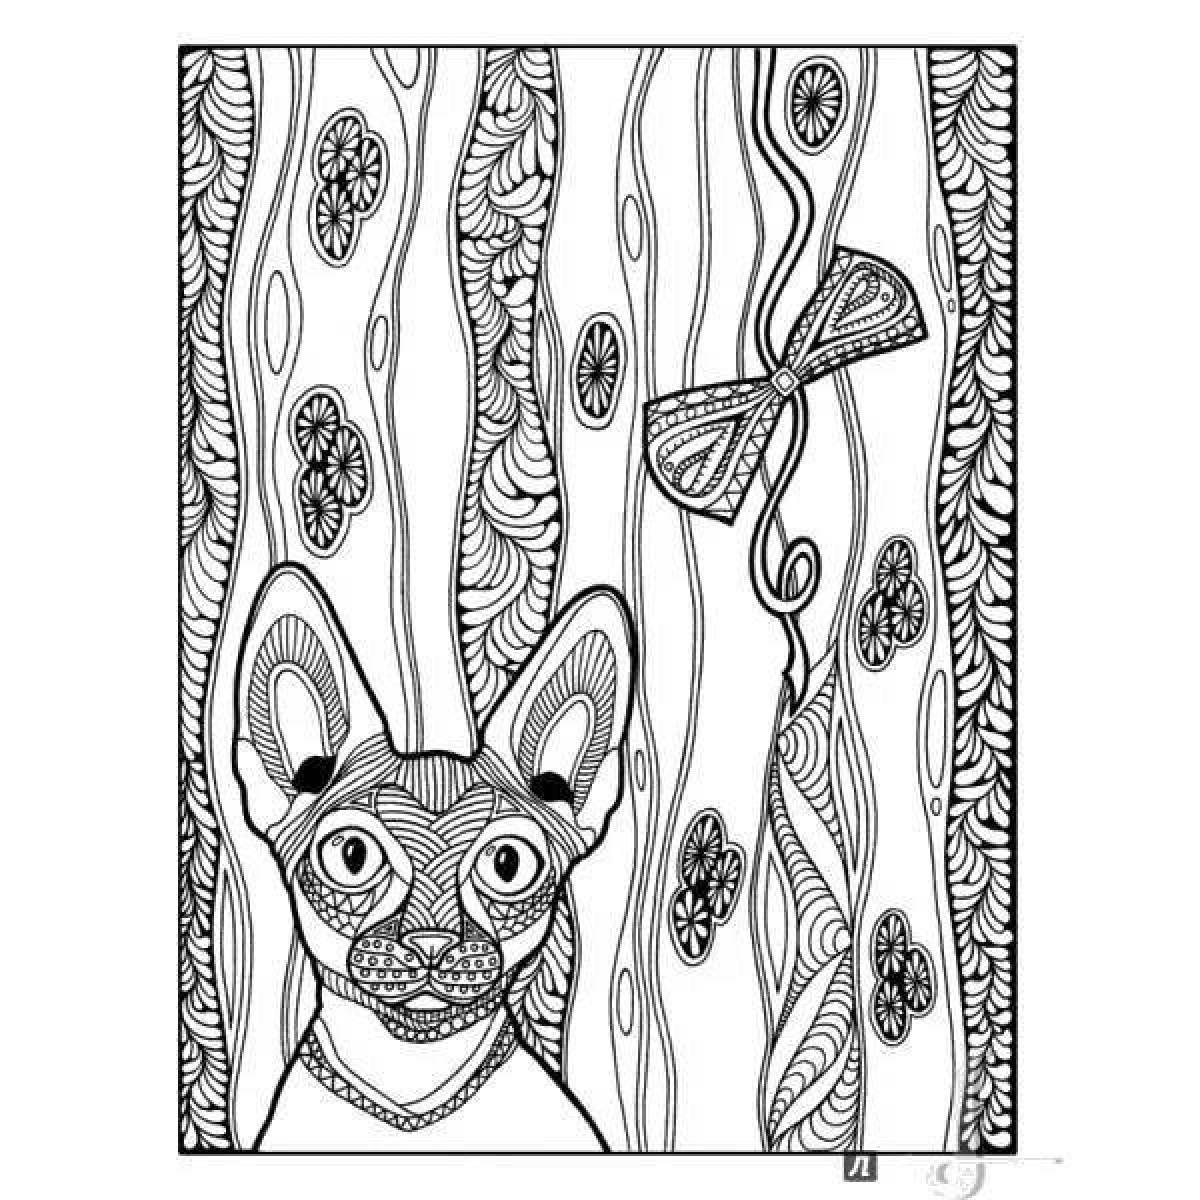 Peaceful cat therapy anti-stress coloring book